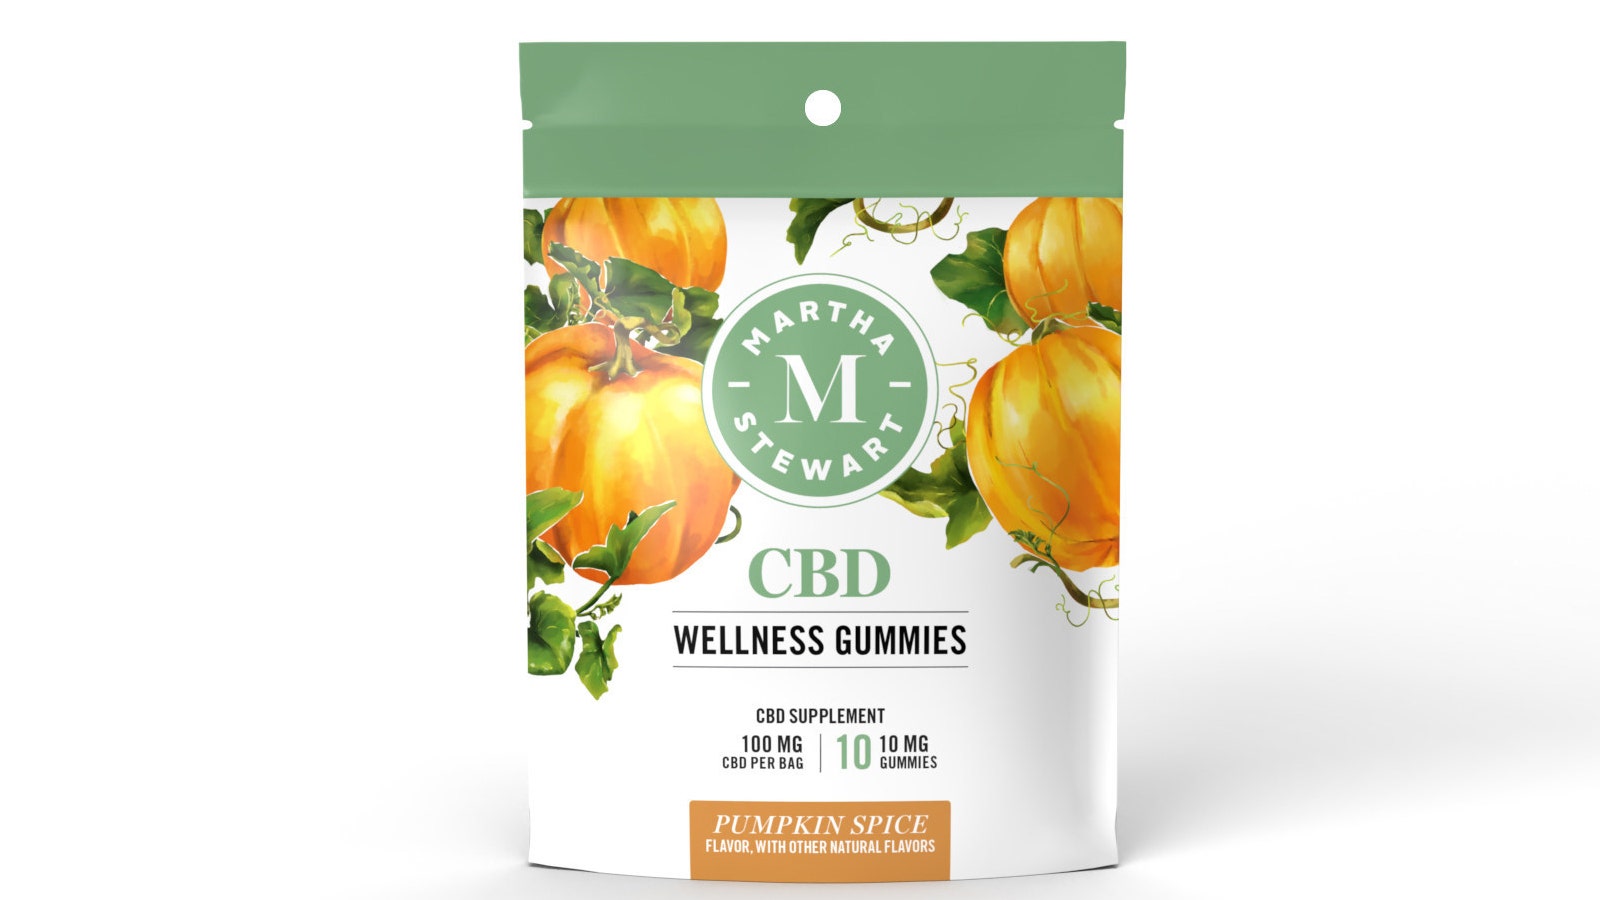 Where To Buy Martha Stewart's New CBD Gummies? New Flavor Hits Shelves Under Partnership With Canopy Growth